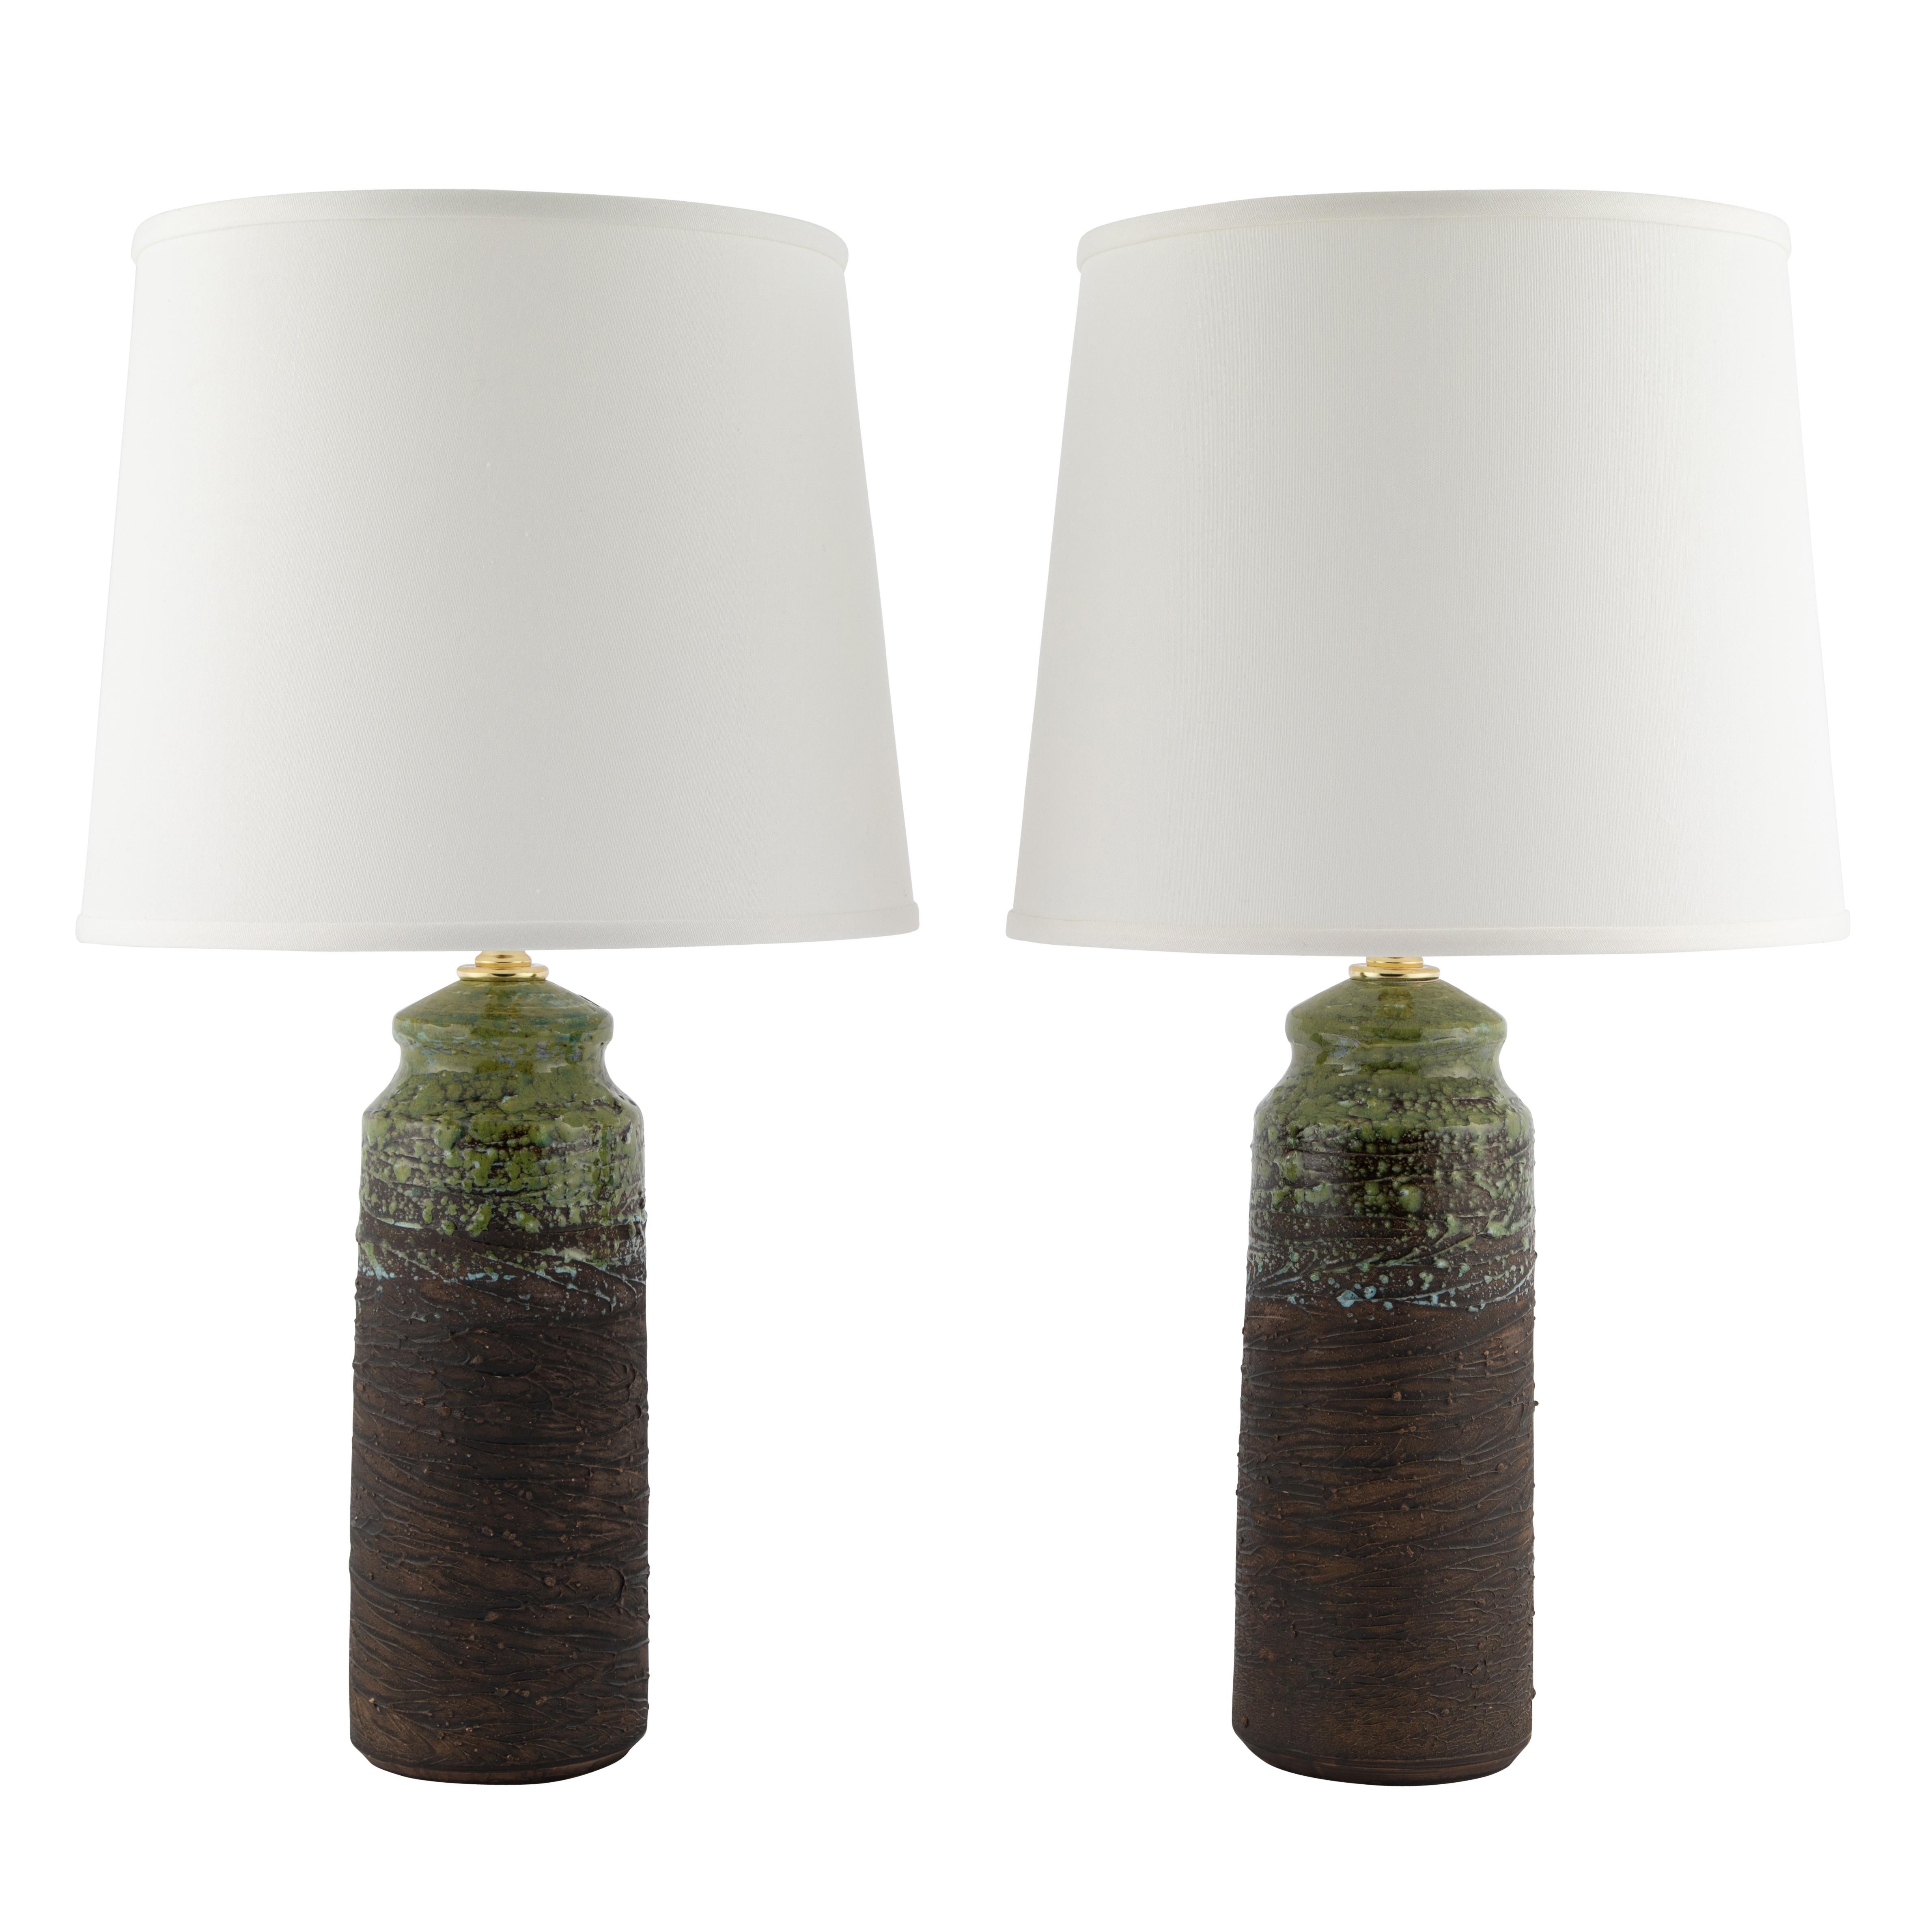 1960s Tilgmans of Sweden Brown Stoneware Table Lamps with Green Glaze Accents im Angebot